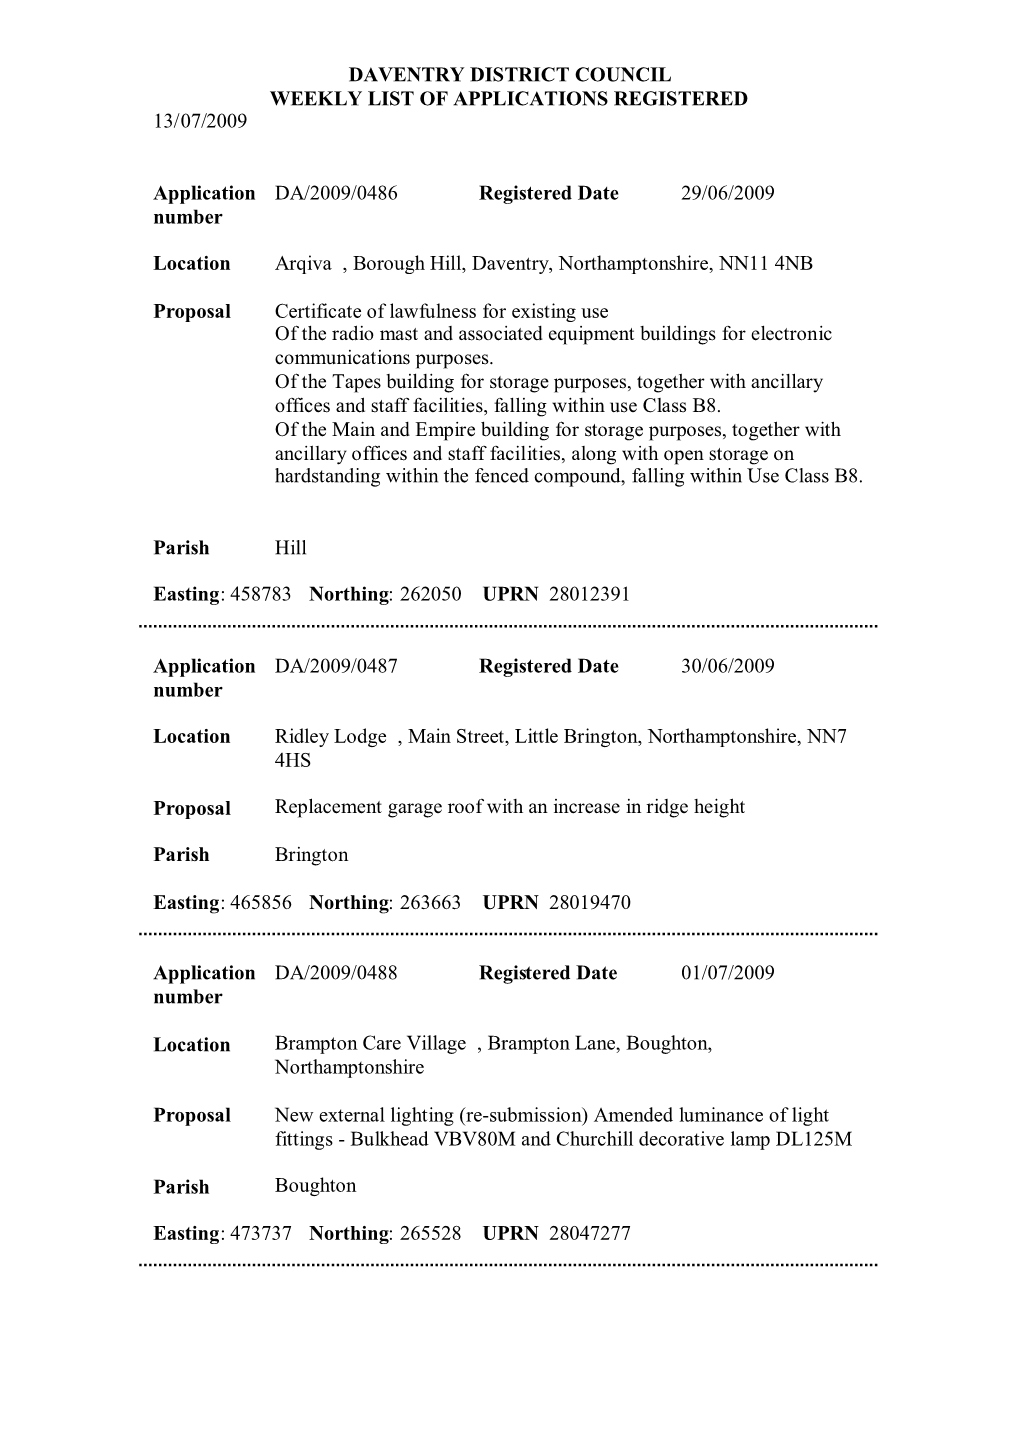 Daventry District Council Weekly List of Applications Registered 13/07/2009